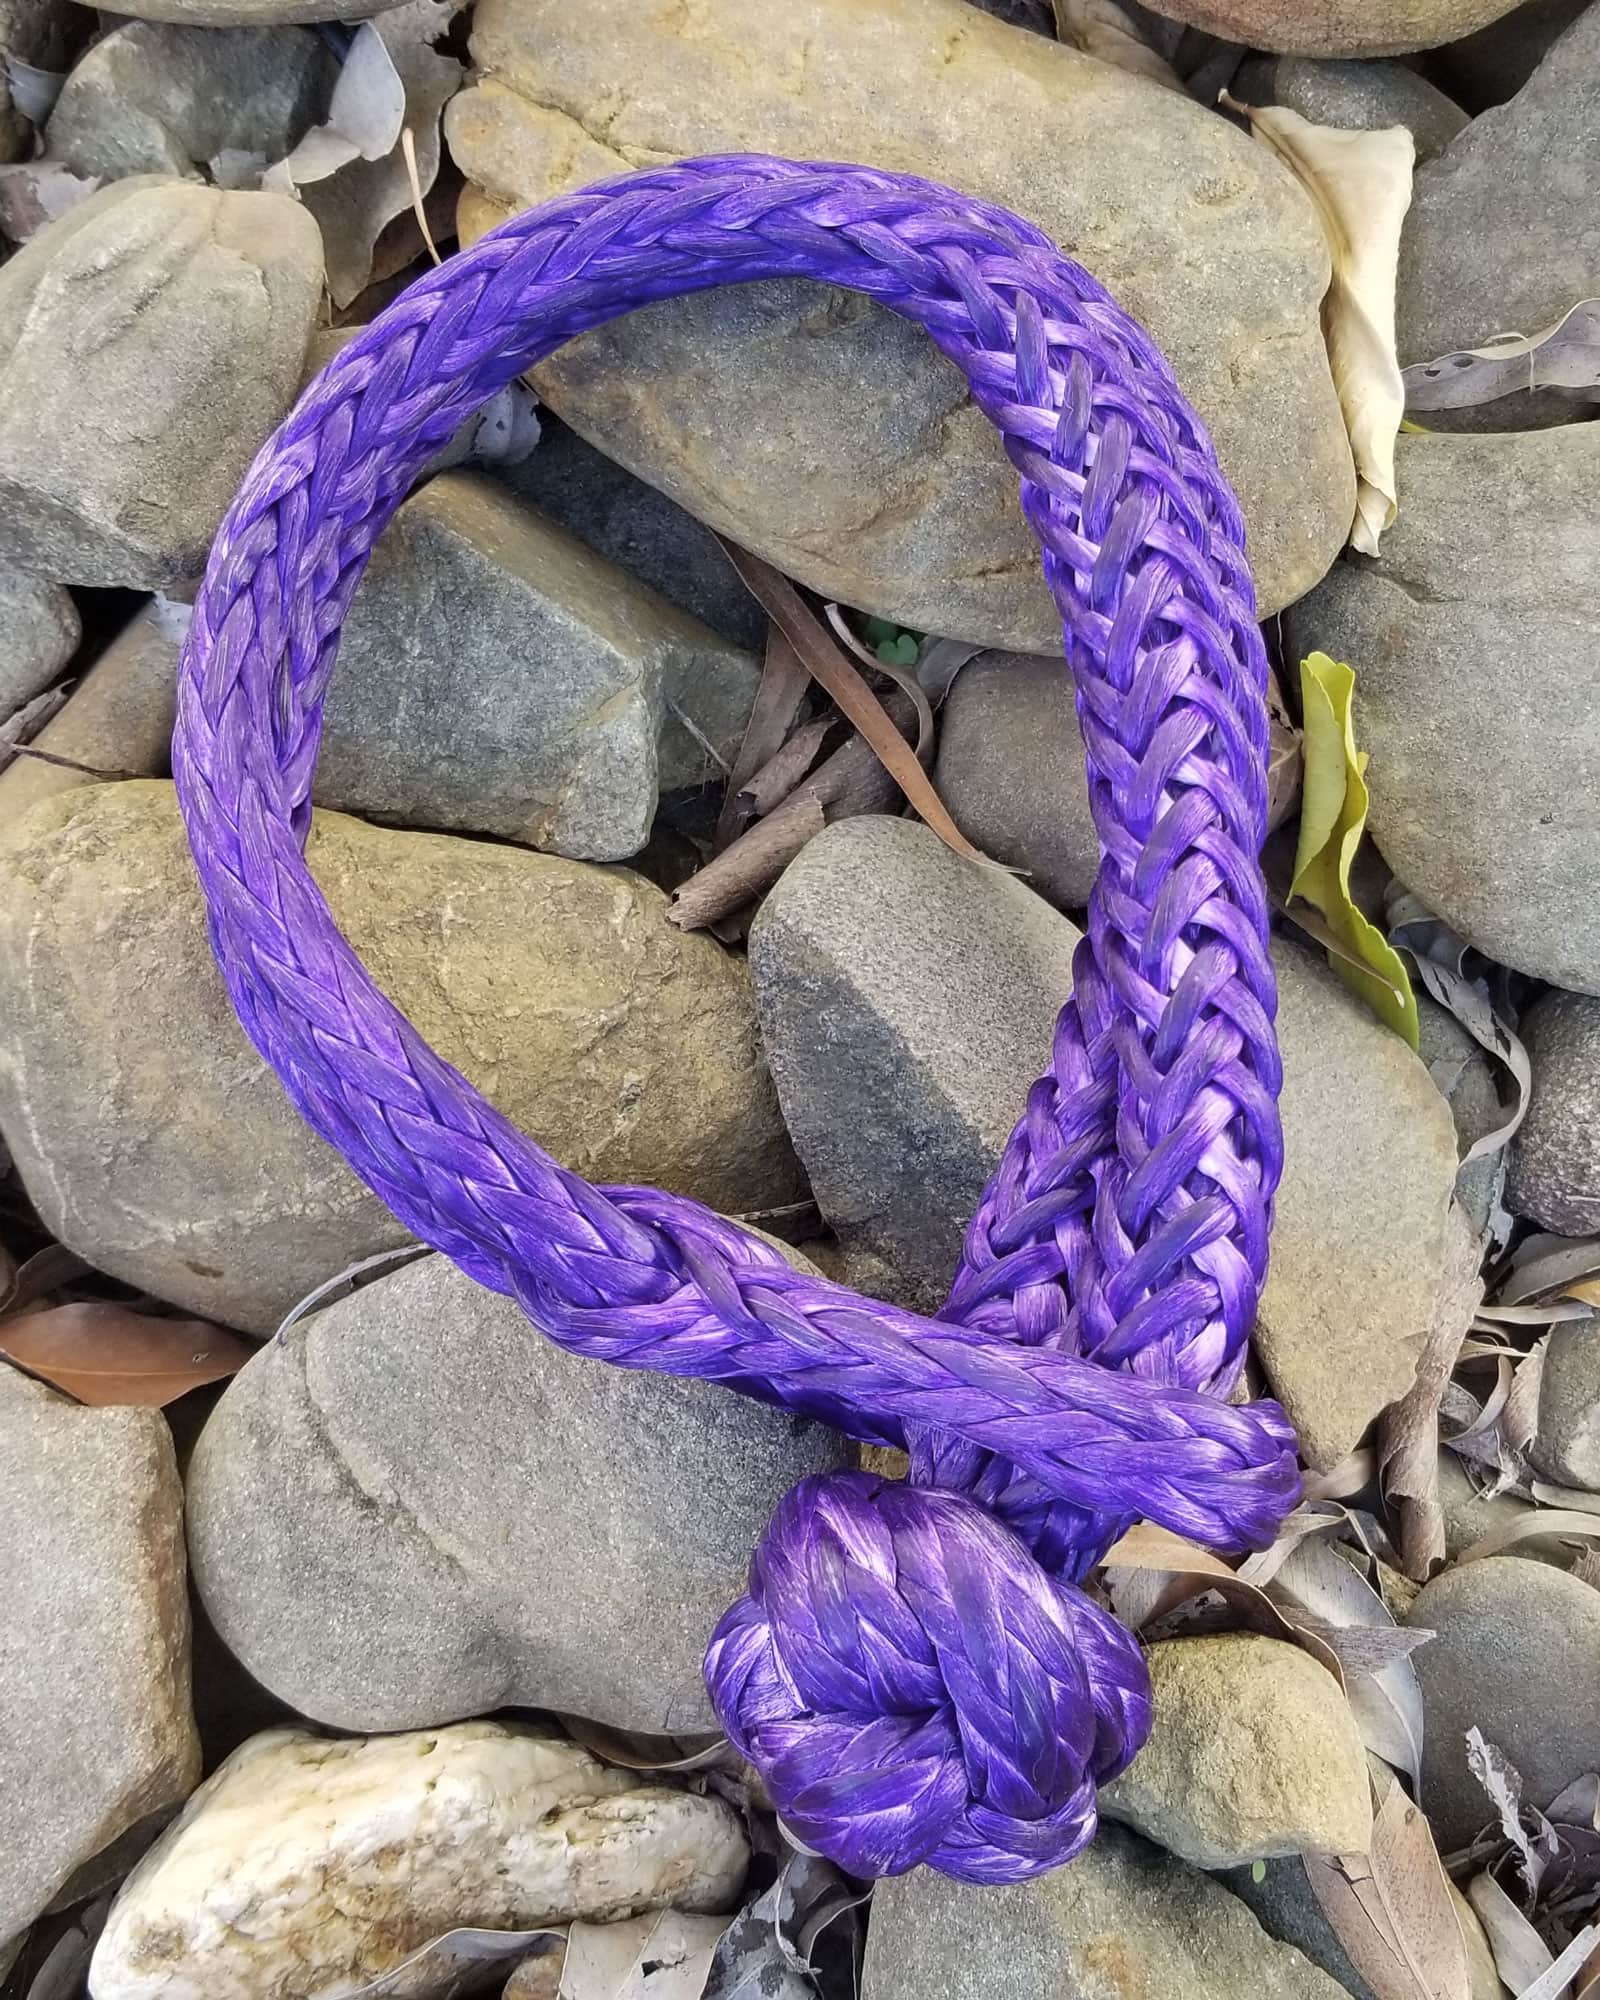 Saber Offroad Shackles for a Cause – PURPLE (Epilepsy Support) | Saber Offroad